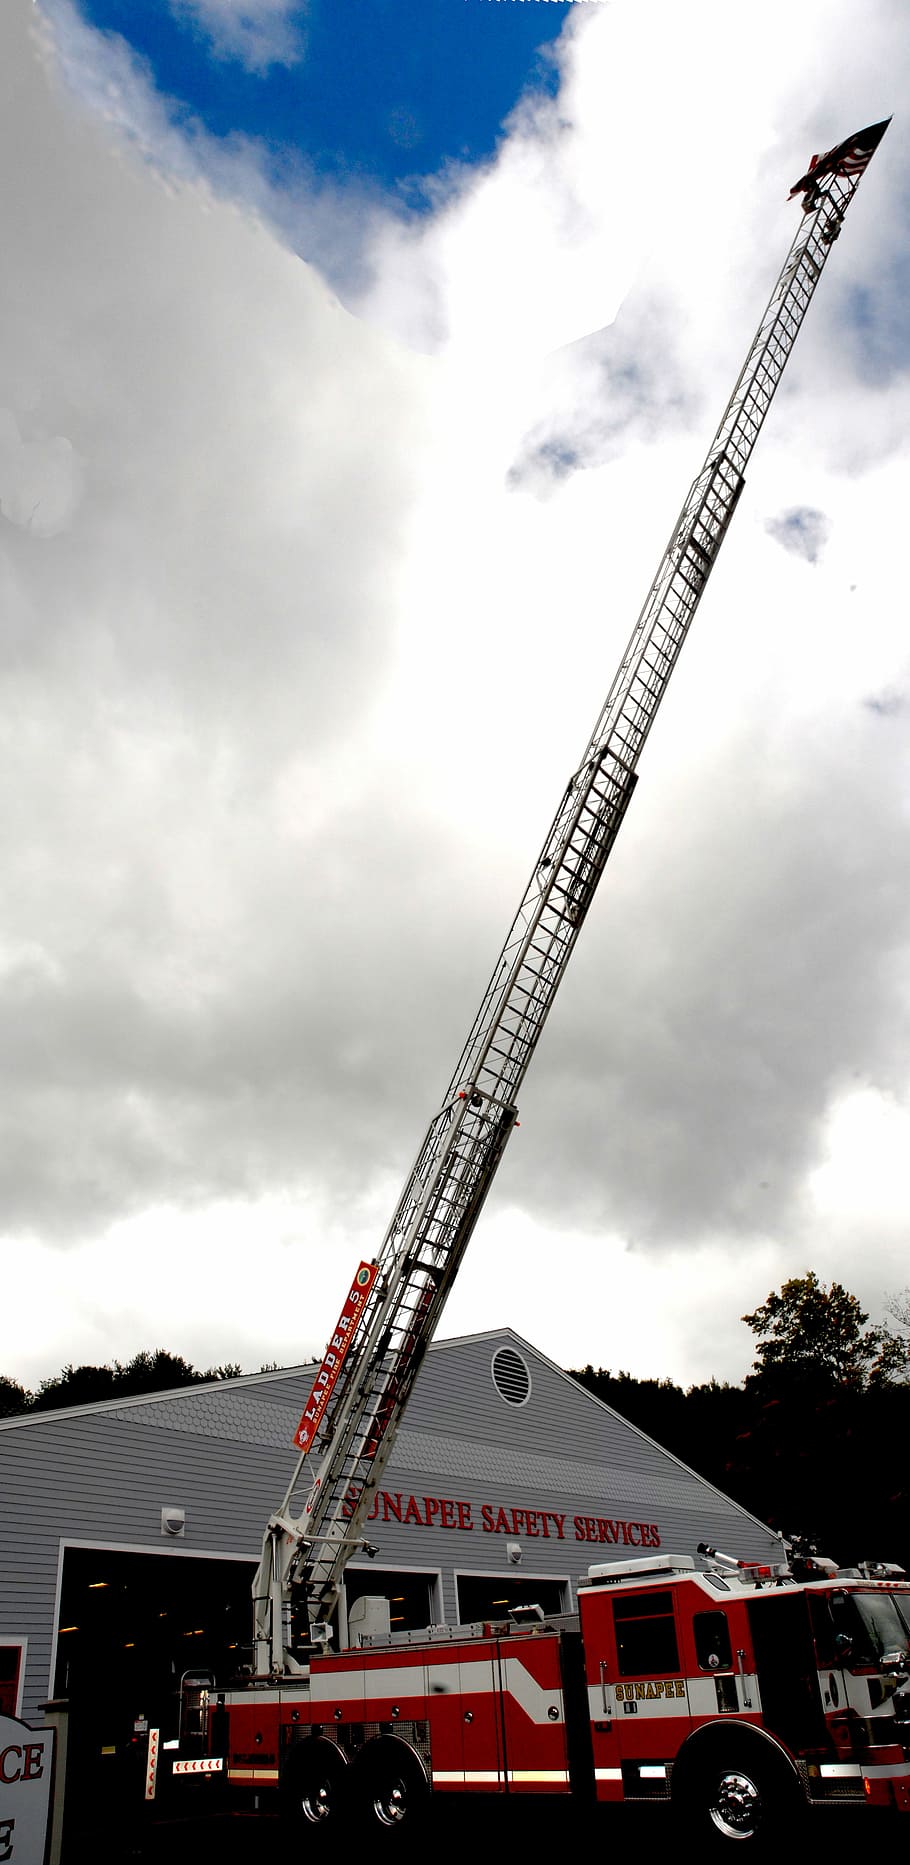 Sunapee's 100-foot ladder in New Hampshire, engine, fire truck